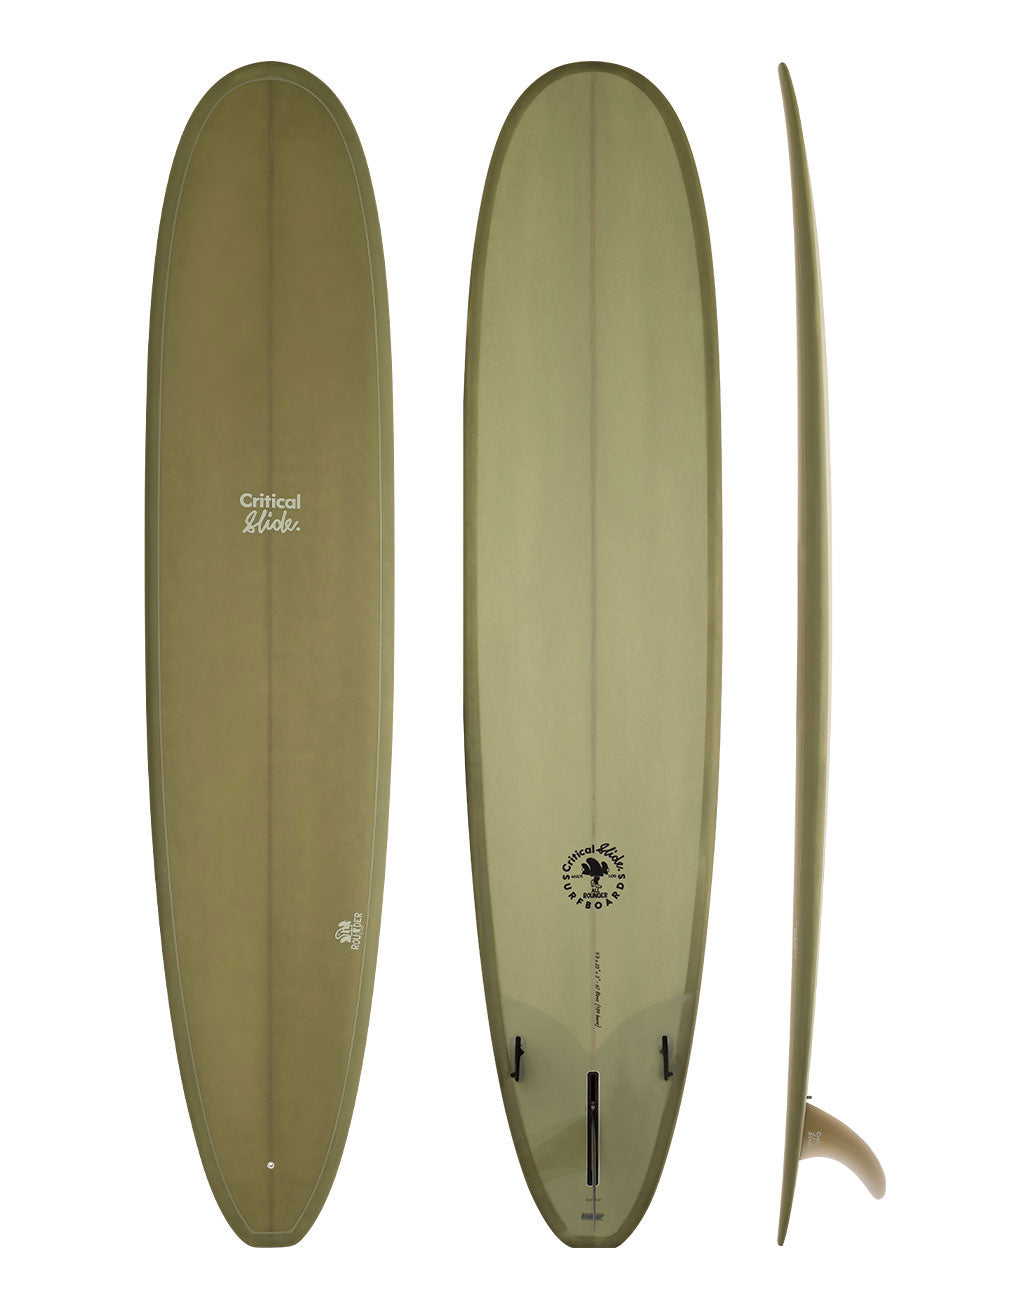 The Critical Slide Society Surfboards - All Rounder - jade green coloured longboard